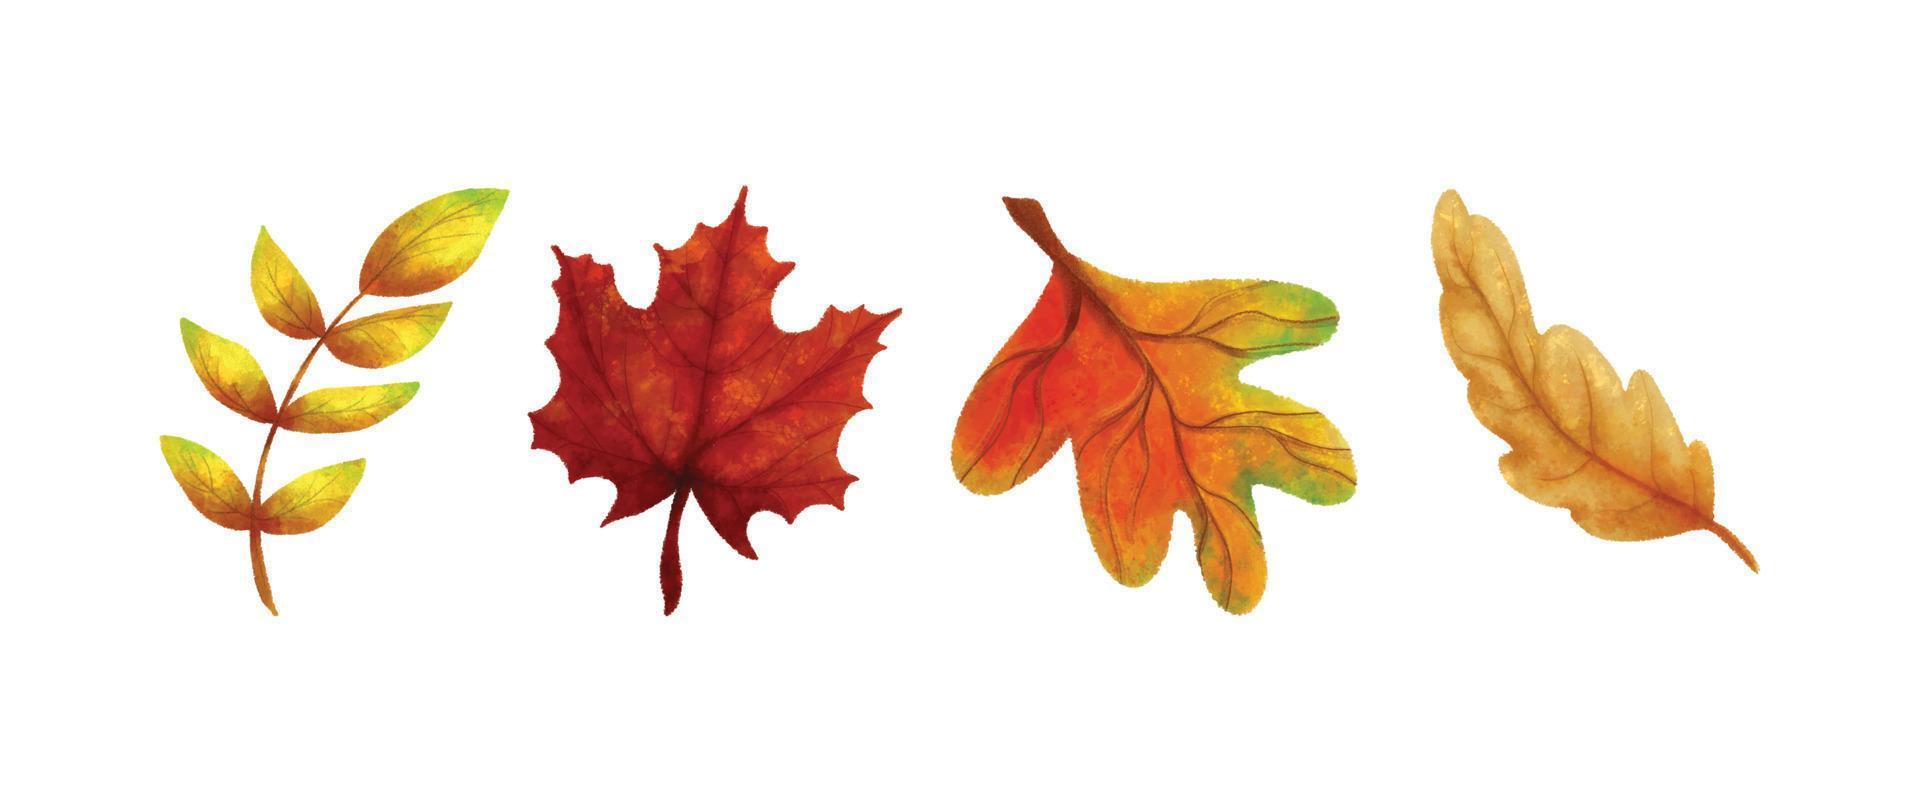 Watercolor Realistic Autumn Leaves Collection 02 vector